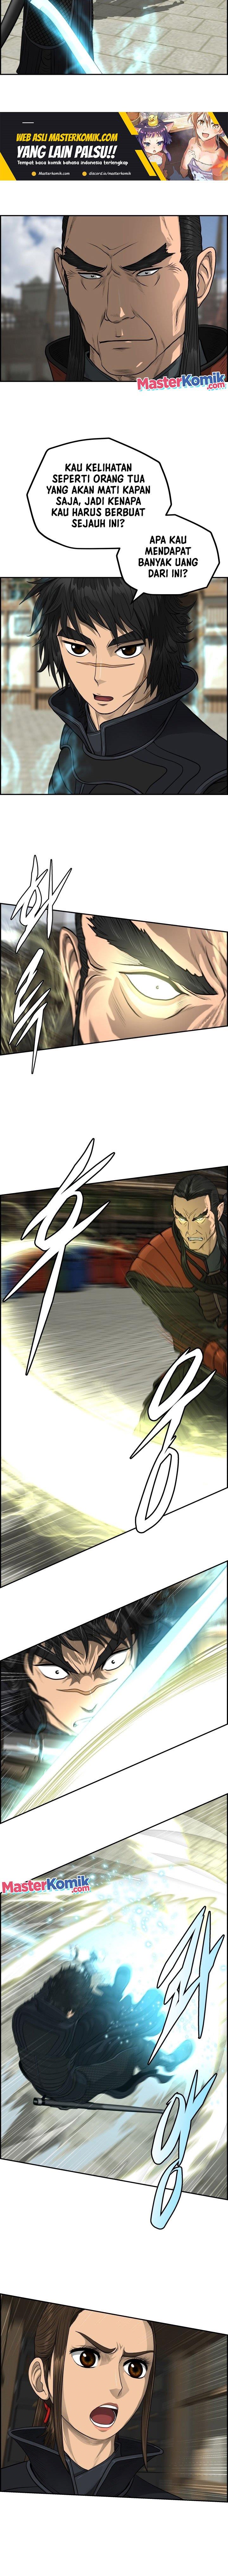 Blade of Winds and Thunders Chapter 62